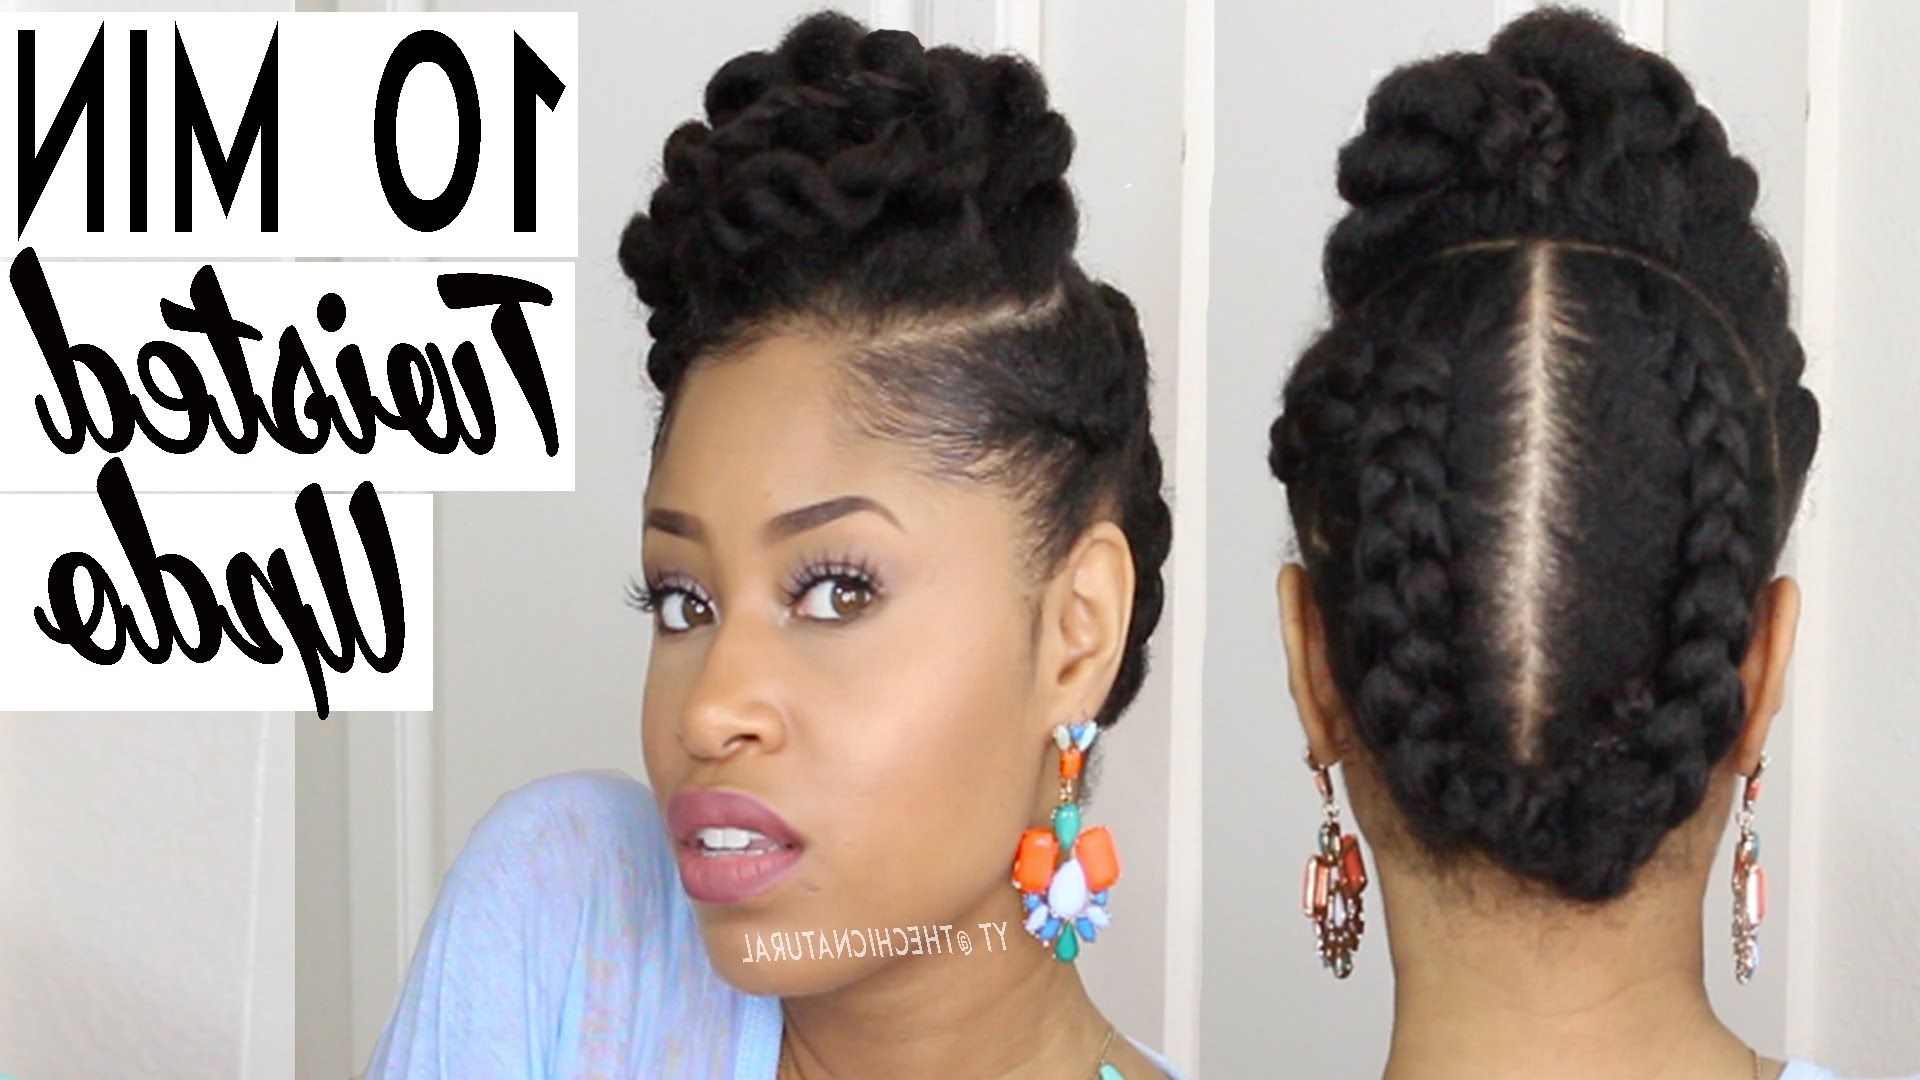 The 10 Minute Twisted Updo | Natural Hairstyle – Youtube Regarding Updo Hairstyles For Black Women With Natural Hair (View 14 of 15)